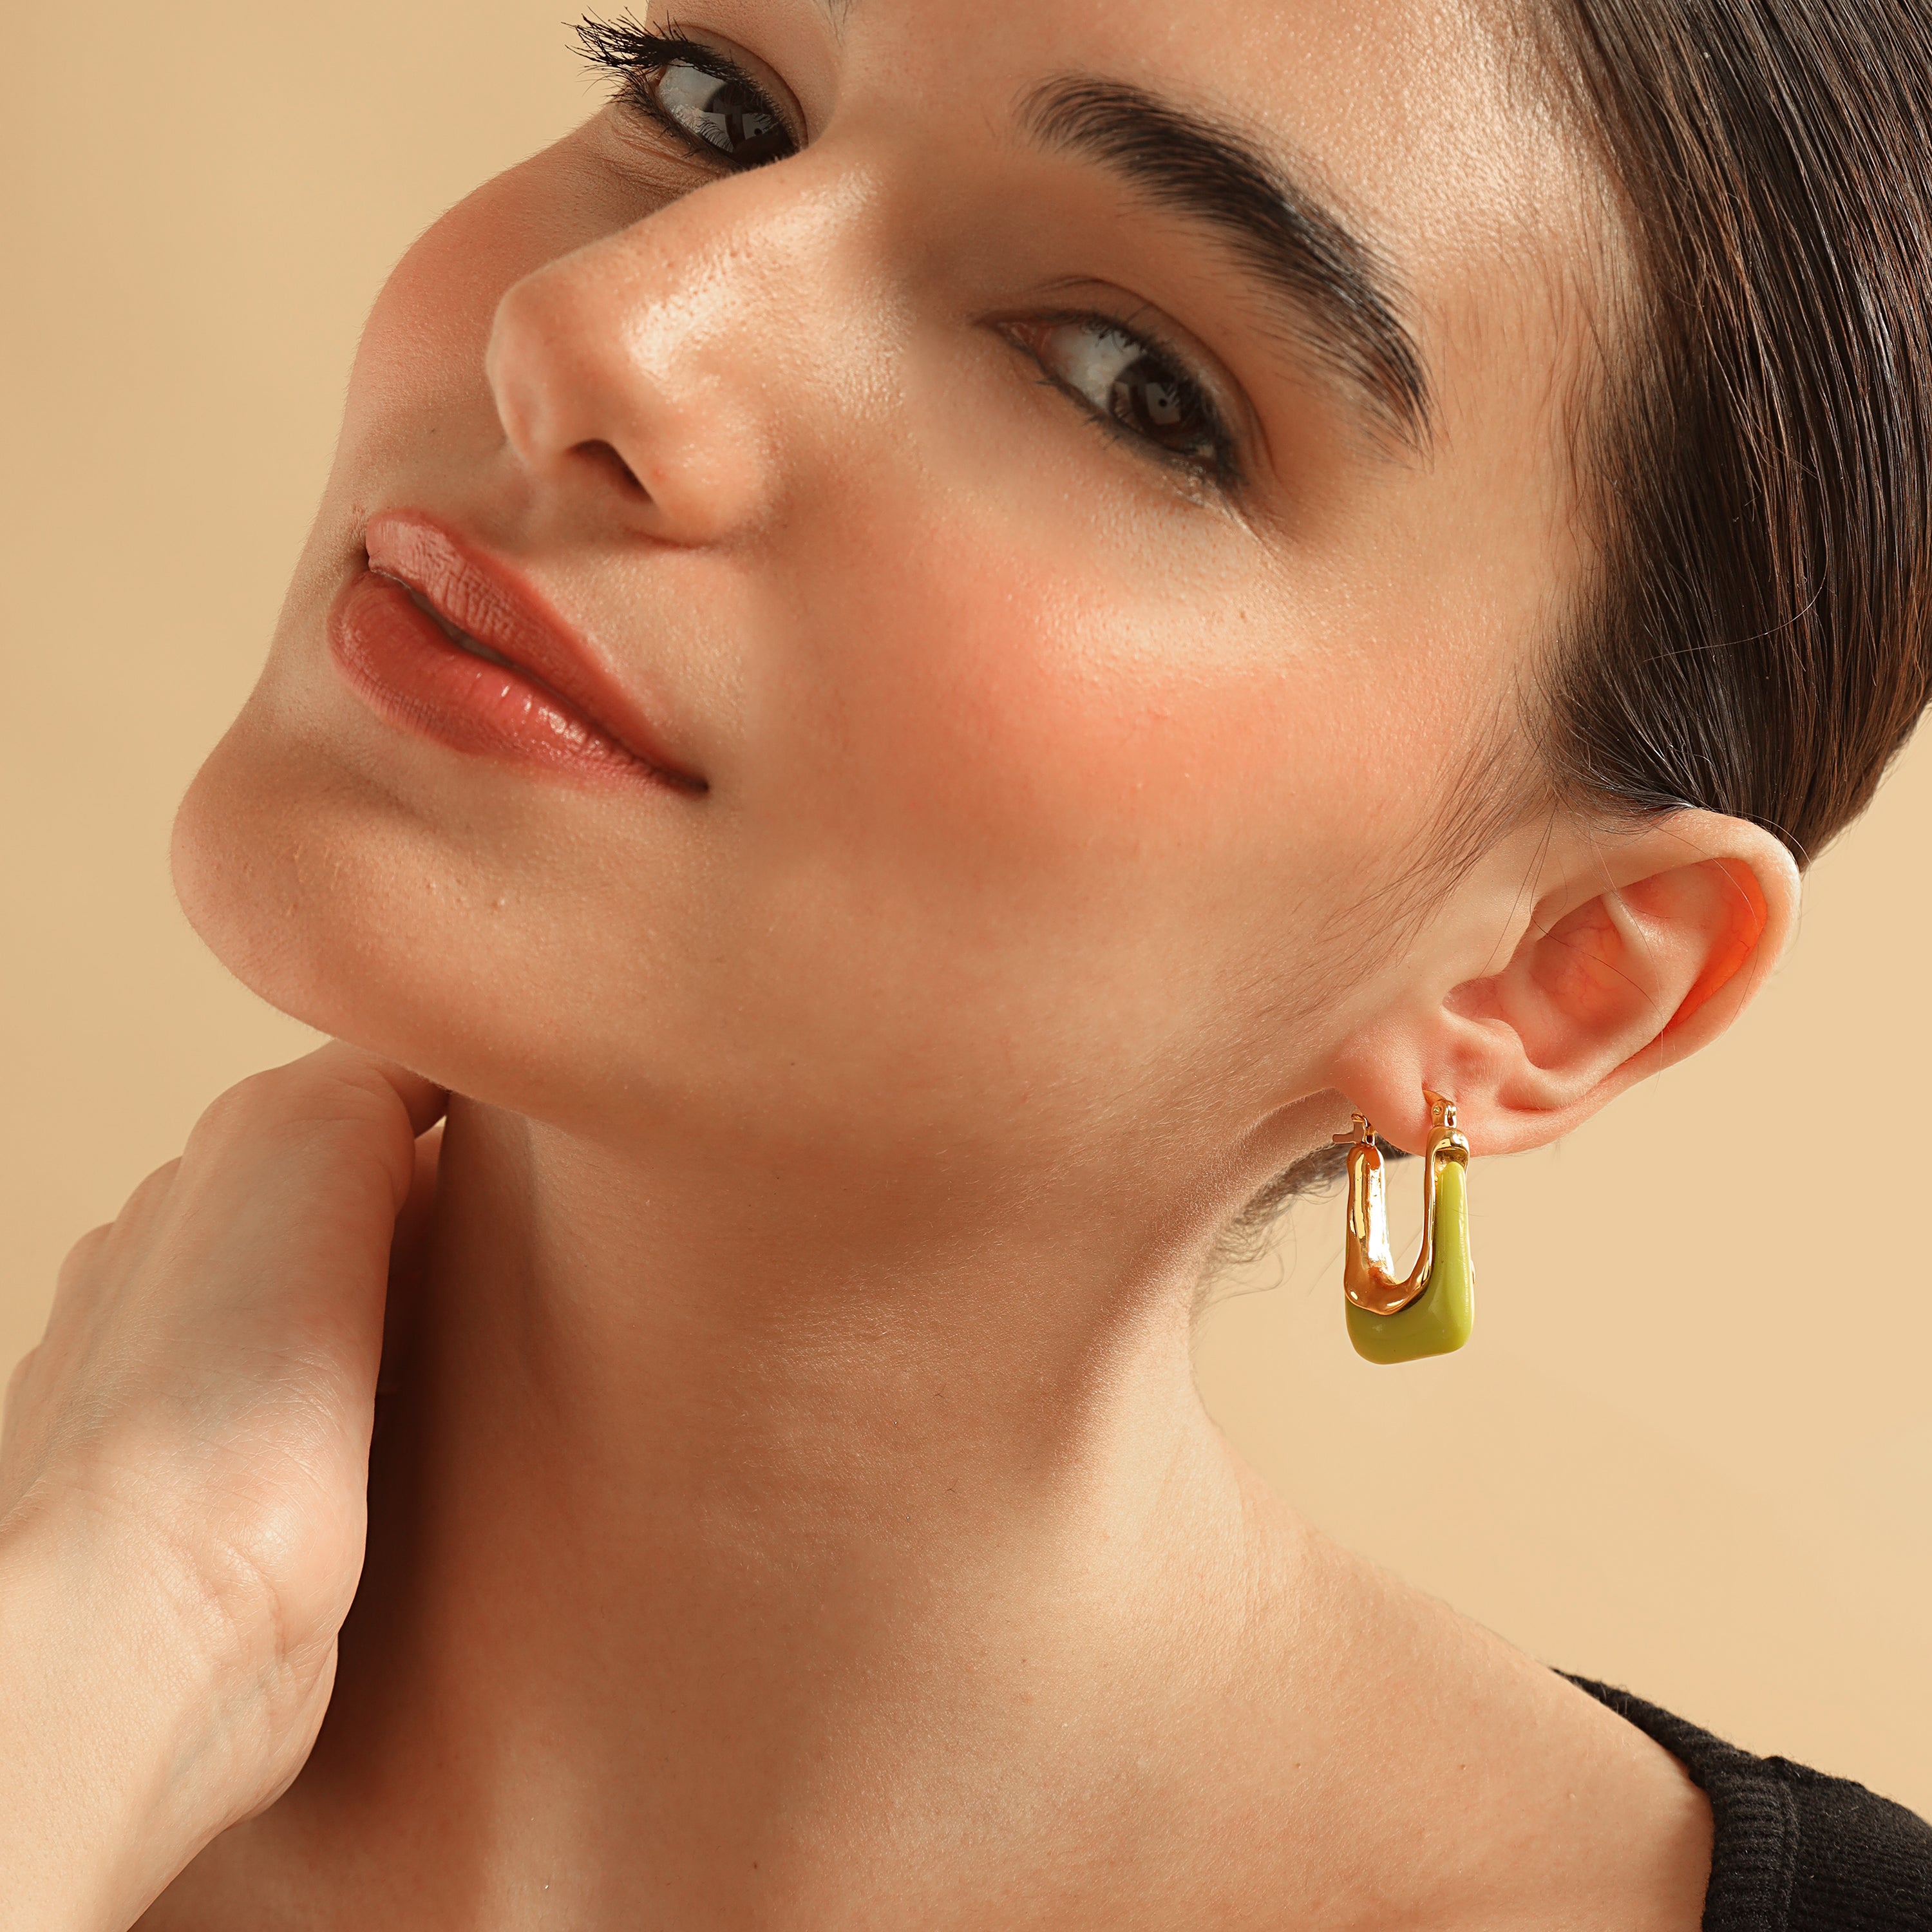 TFC Square Green Resin Gold Plated Hoop Earrings- Discover daily wear gold earrings including stud earrings, hoop earrings, and pearl earrings, perfect as earrings for women and earrings for girls.Find the cheapest fashion jewellery which is anti-tarnis​h only at The Fun company